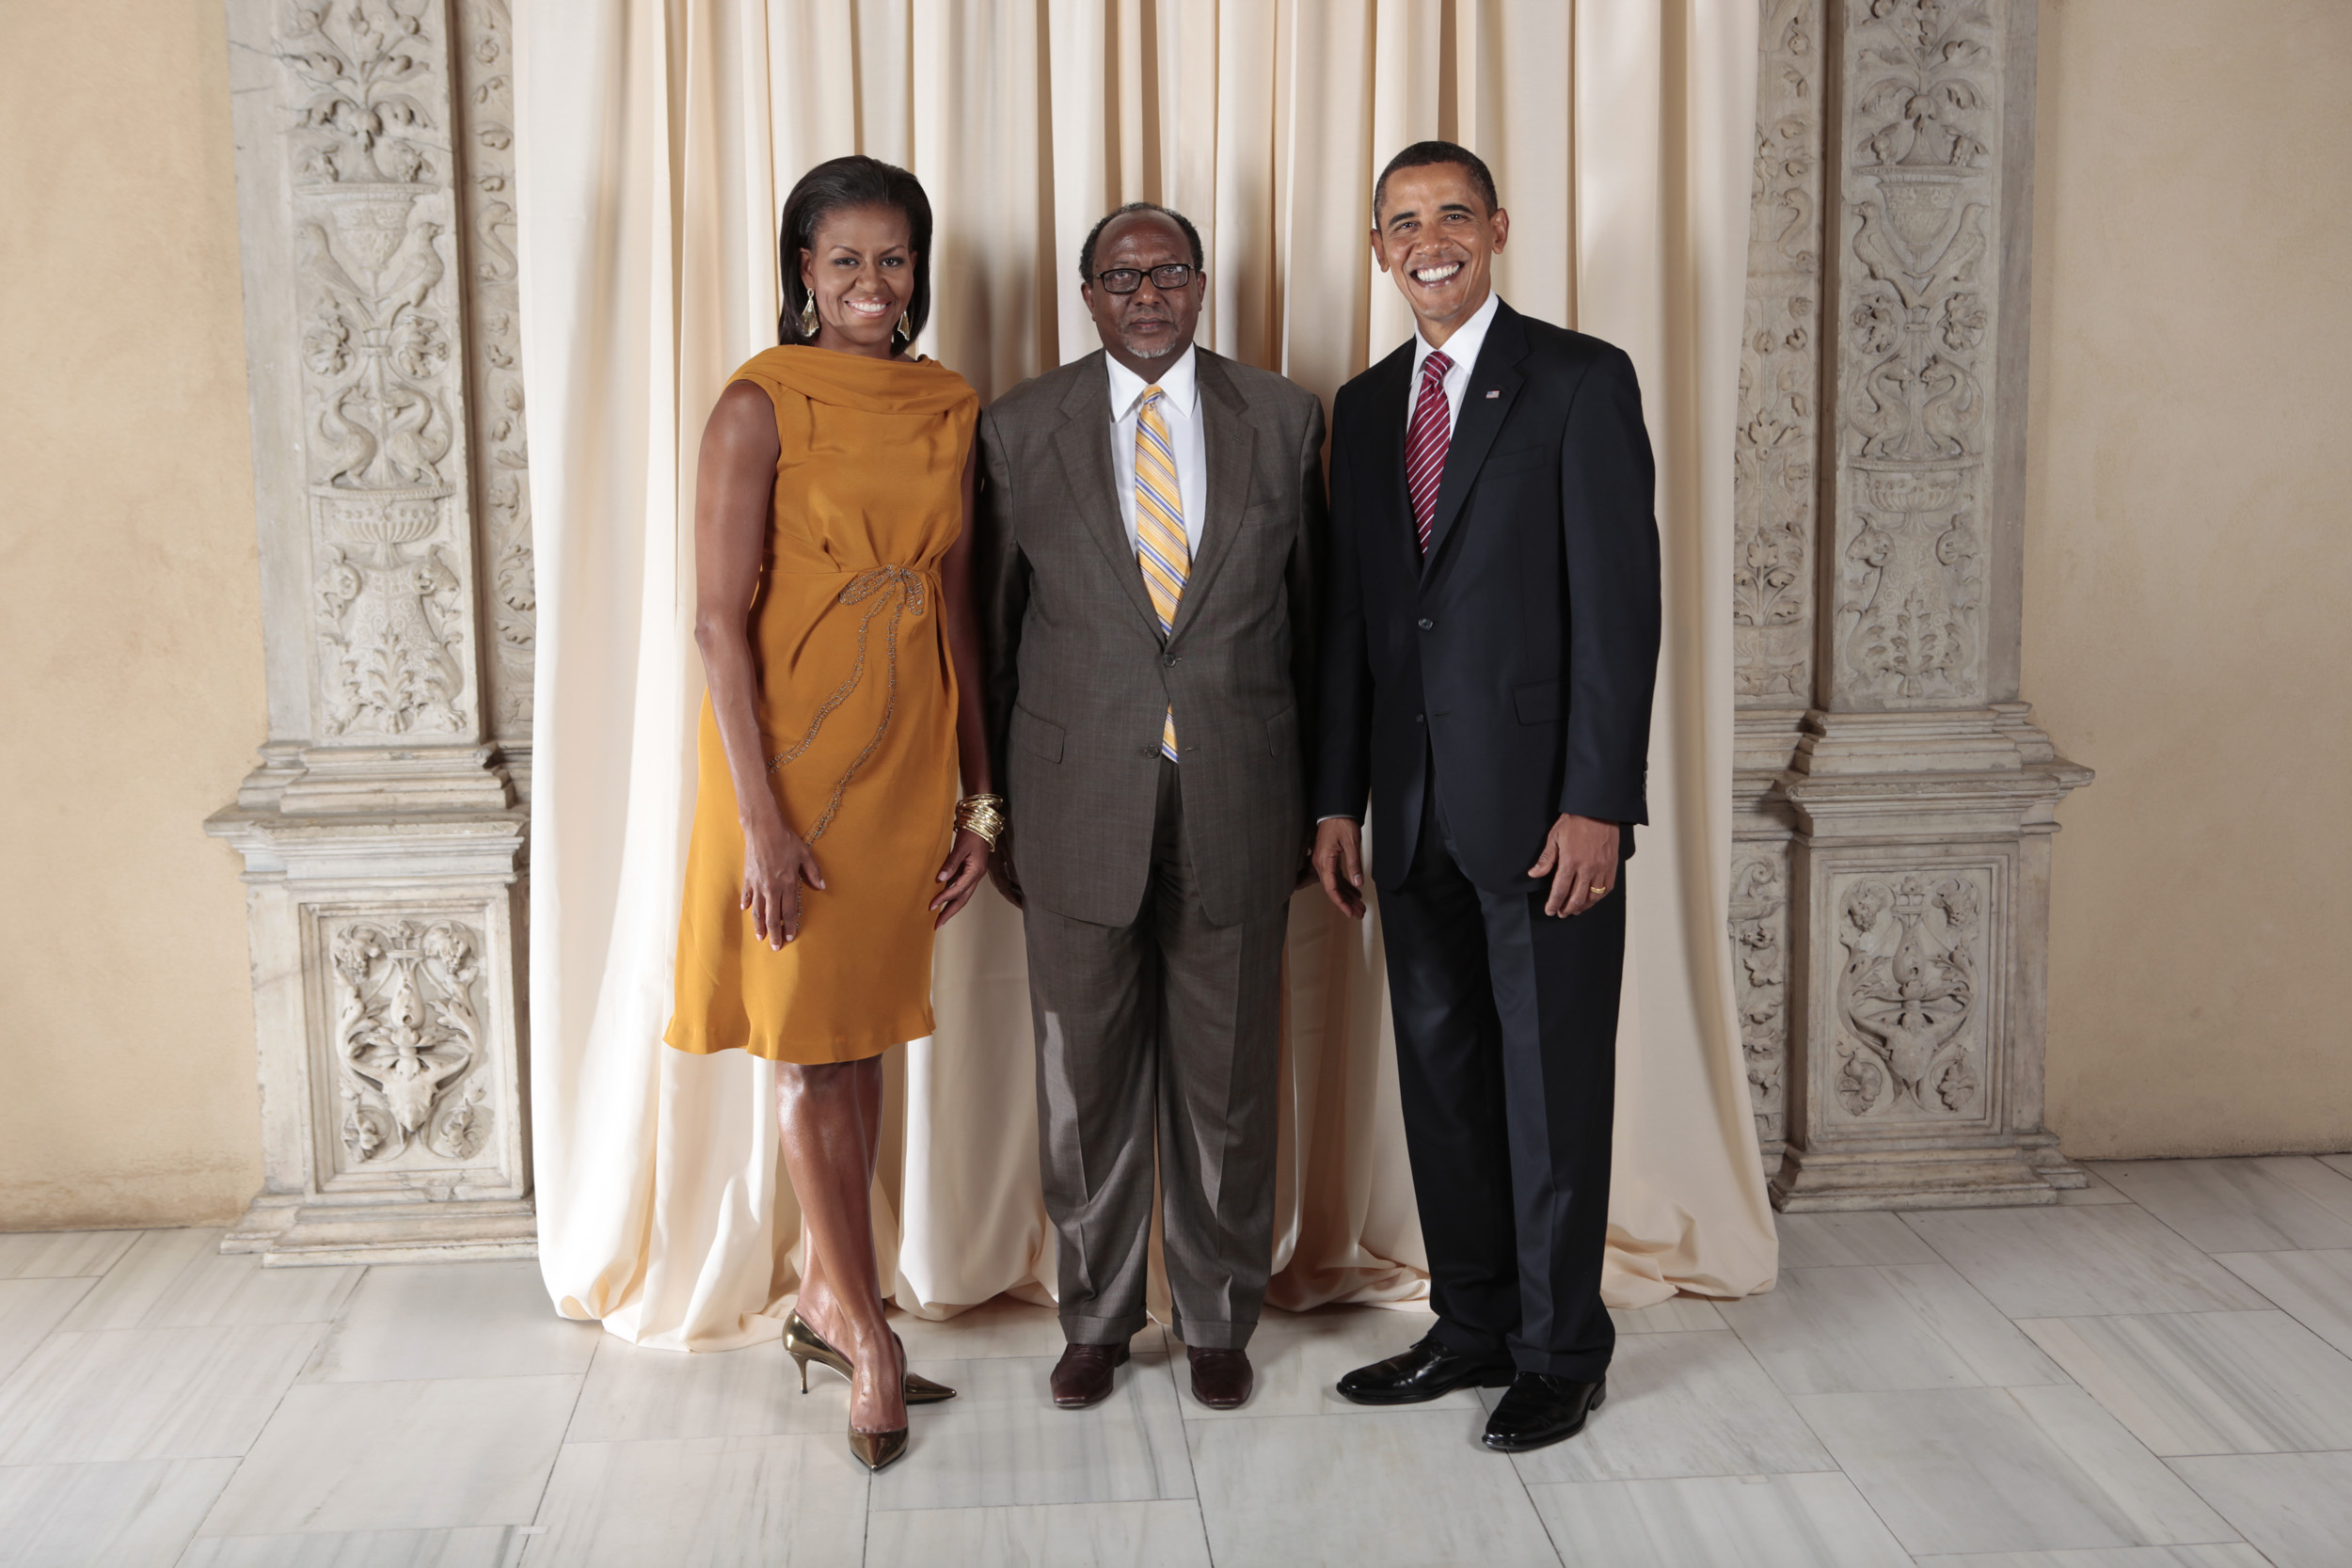 Roble Olhaye with Obamas